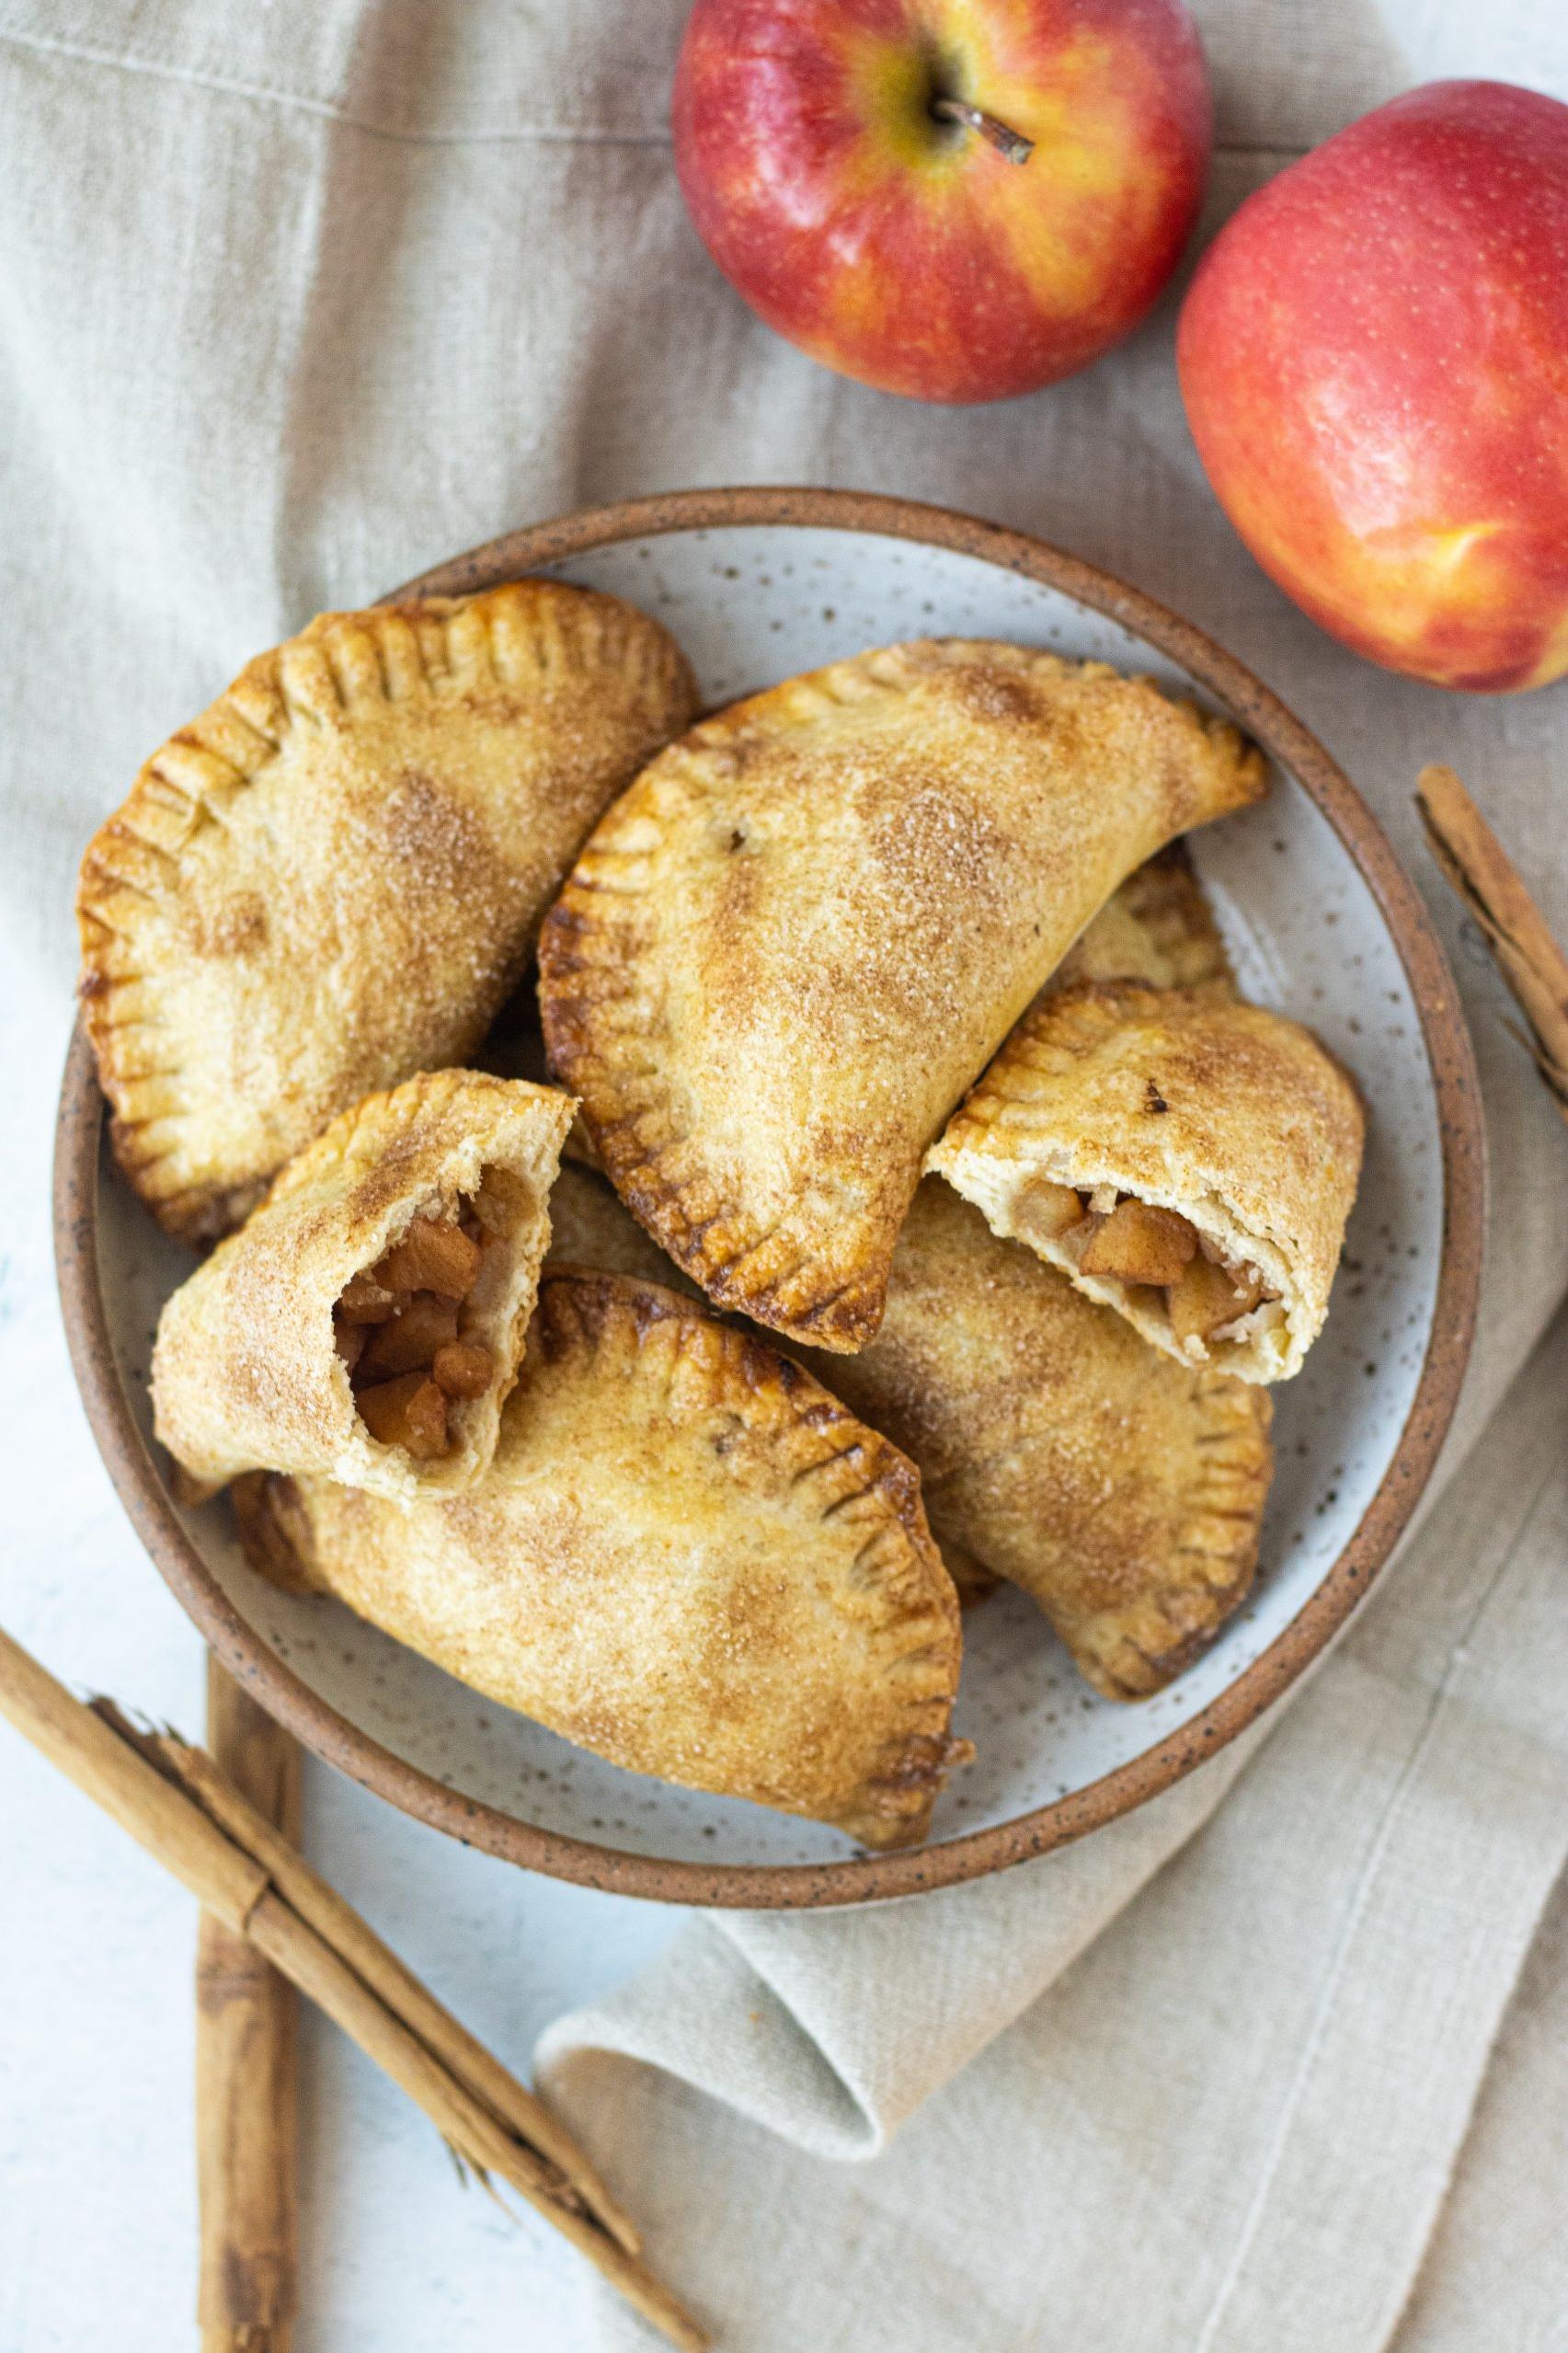  Perfect as a dessert or an afternoon snack, these empanadas are a delicious blend of fruity and spicy flavors.